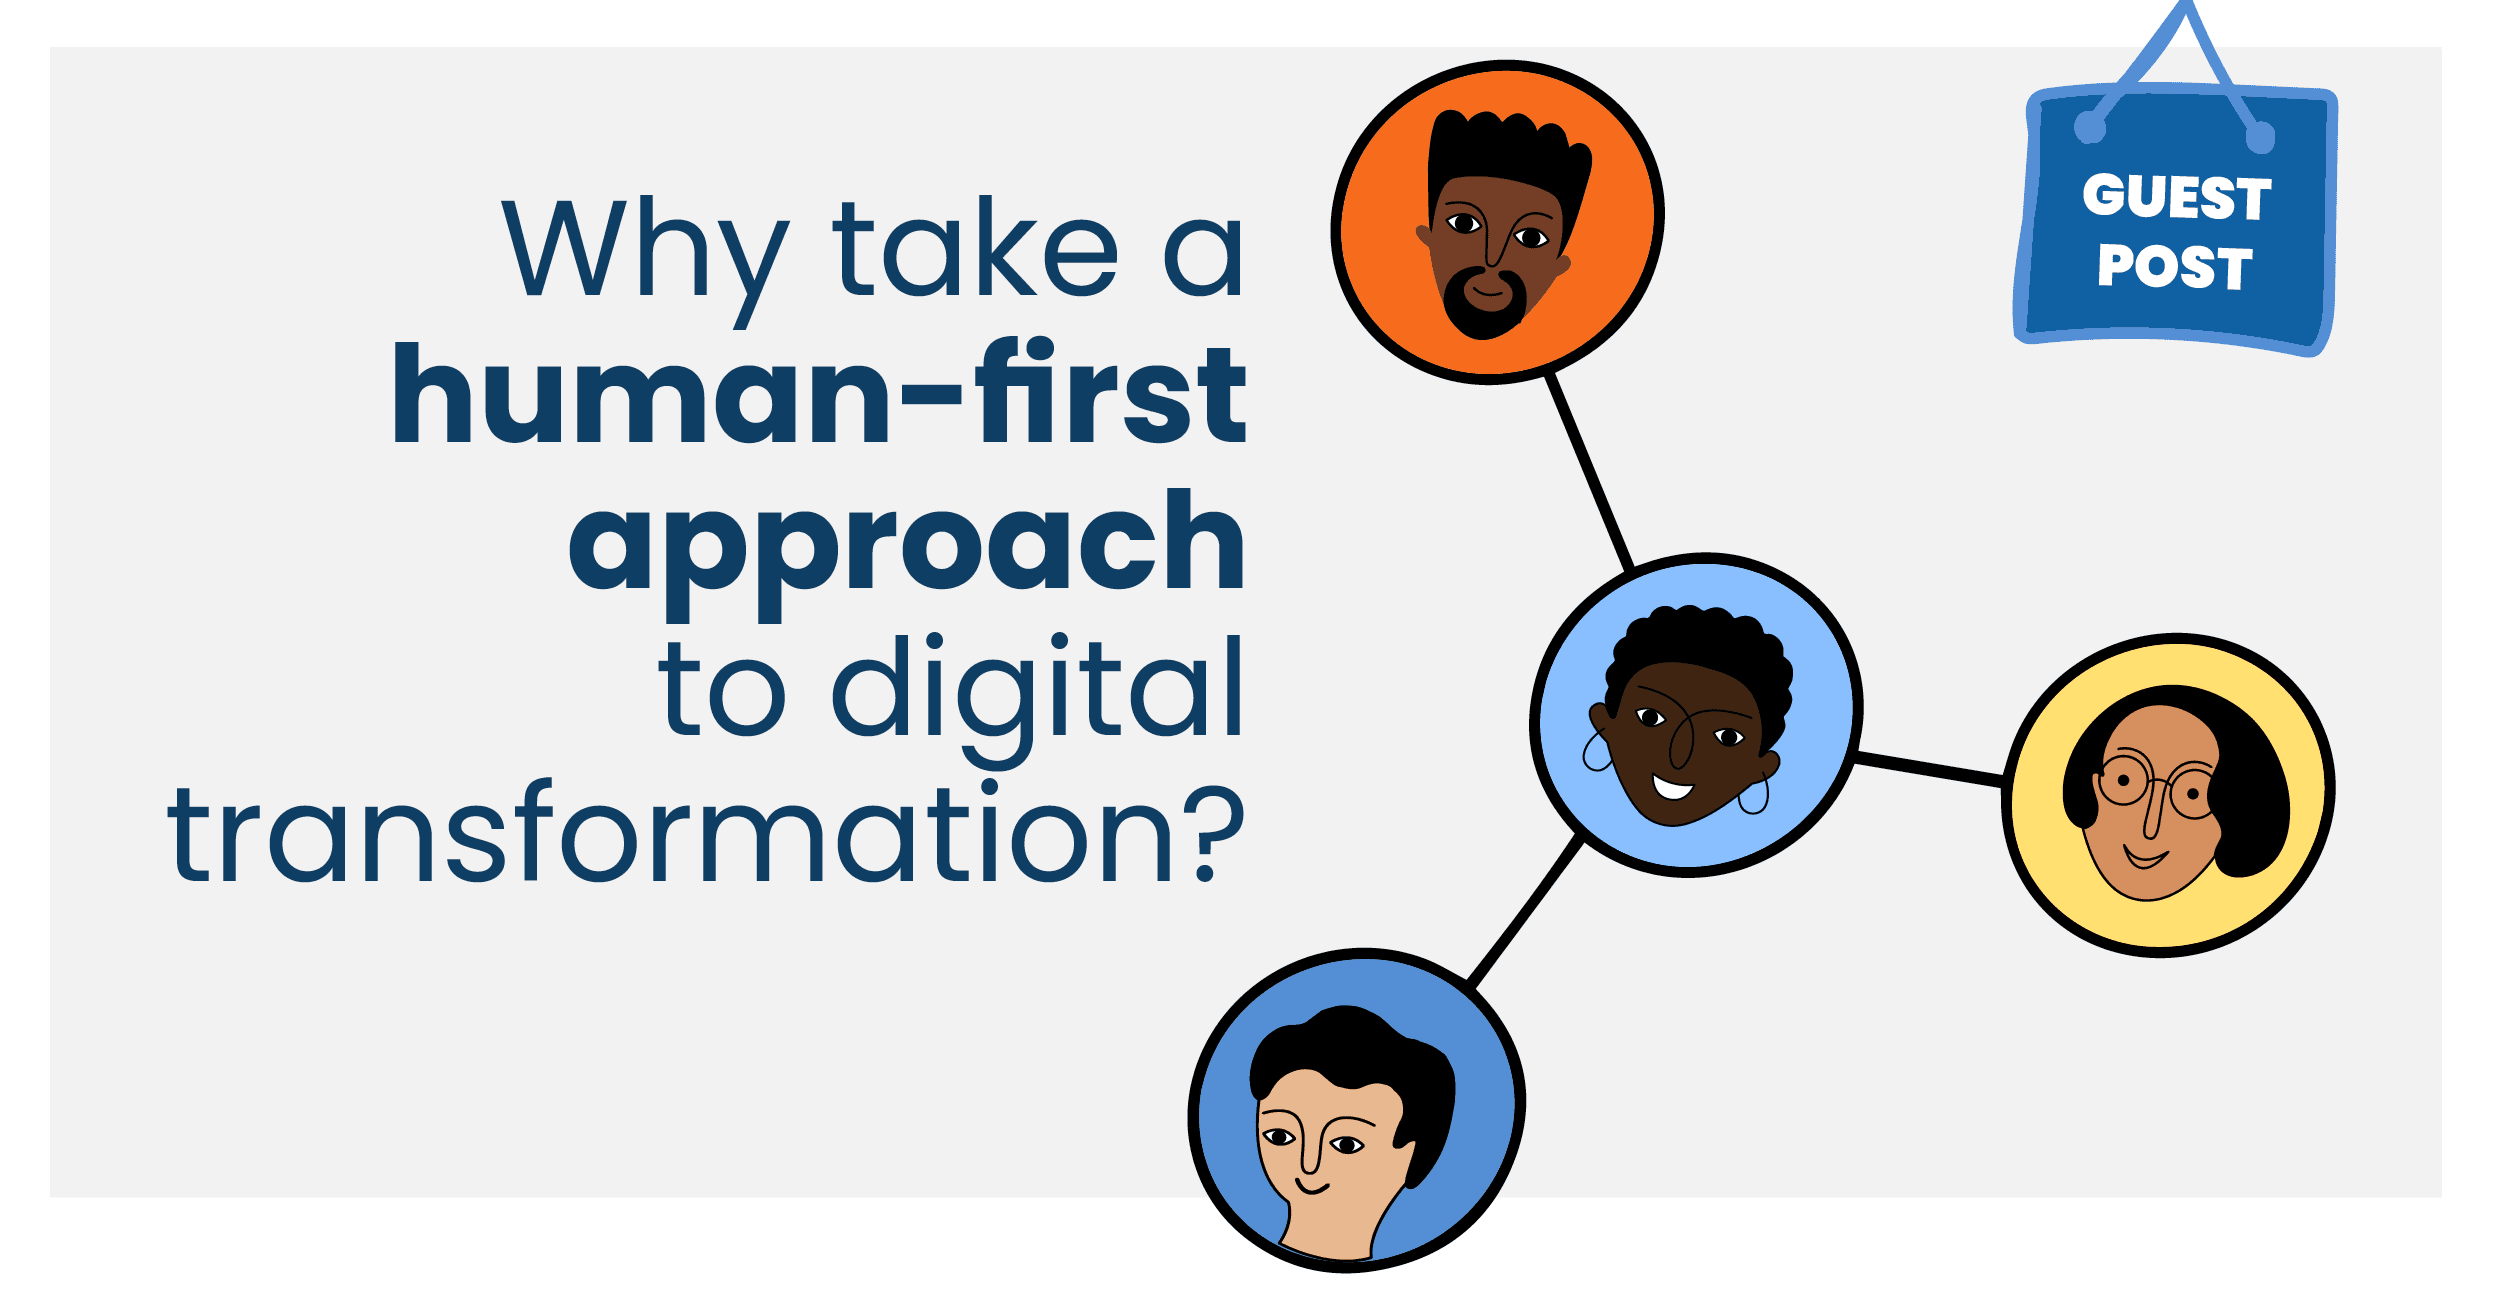 Guest post: Why take a human-first approach to digital transformation?